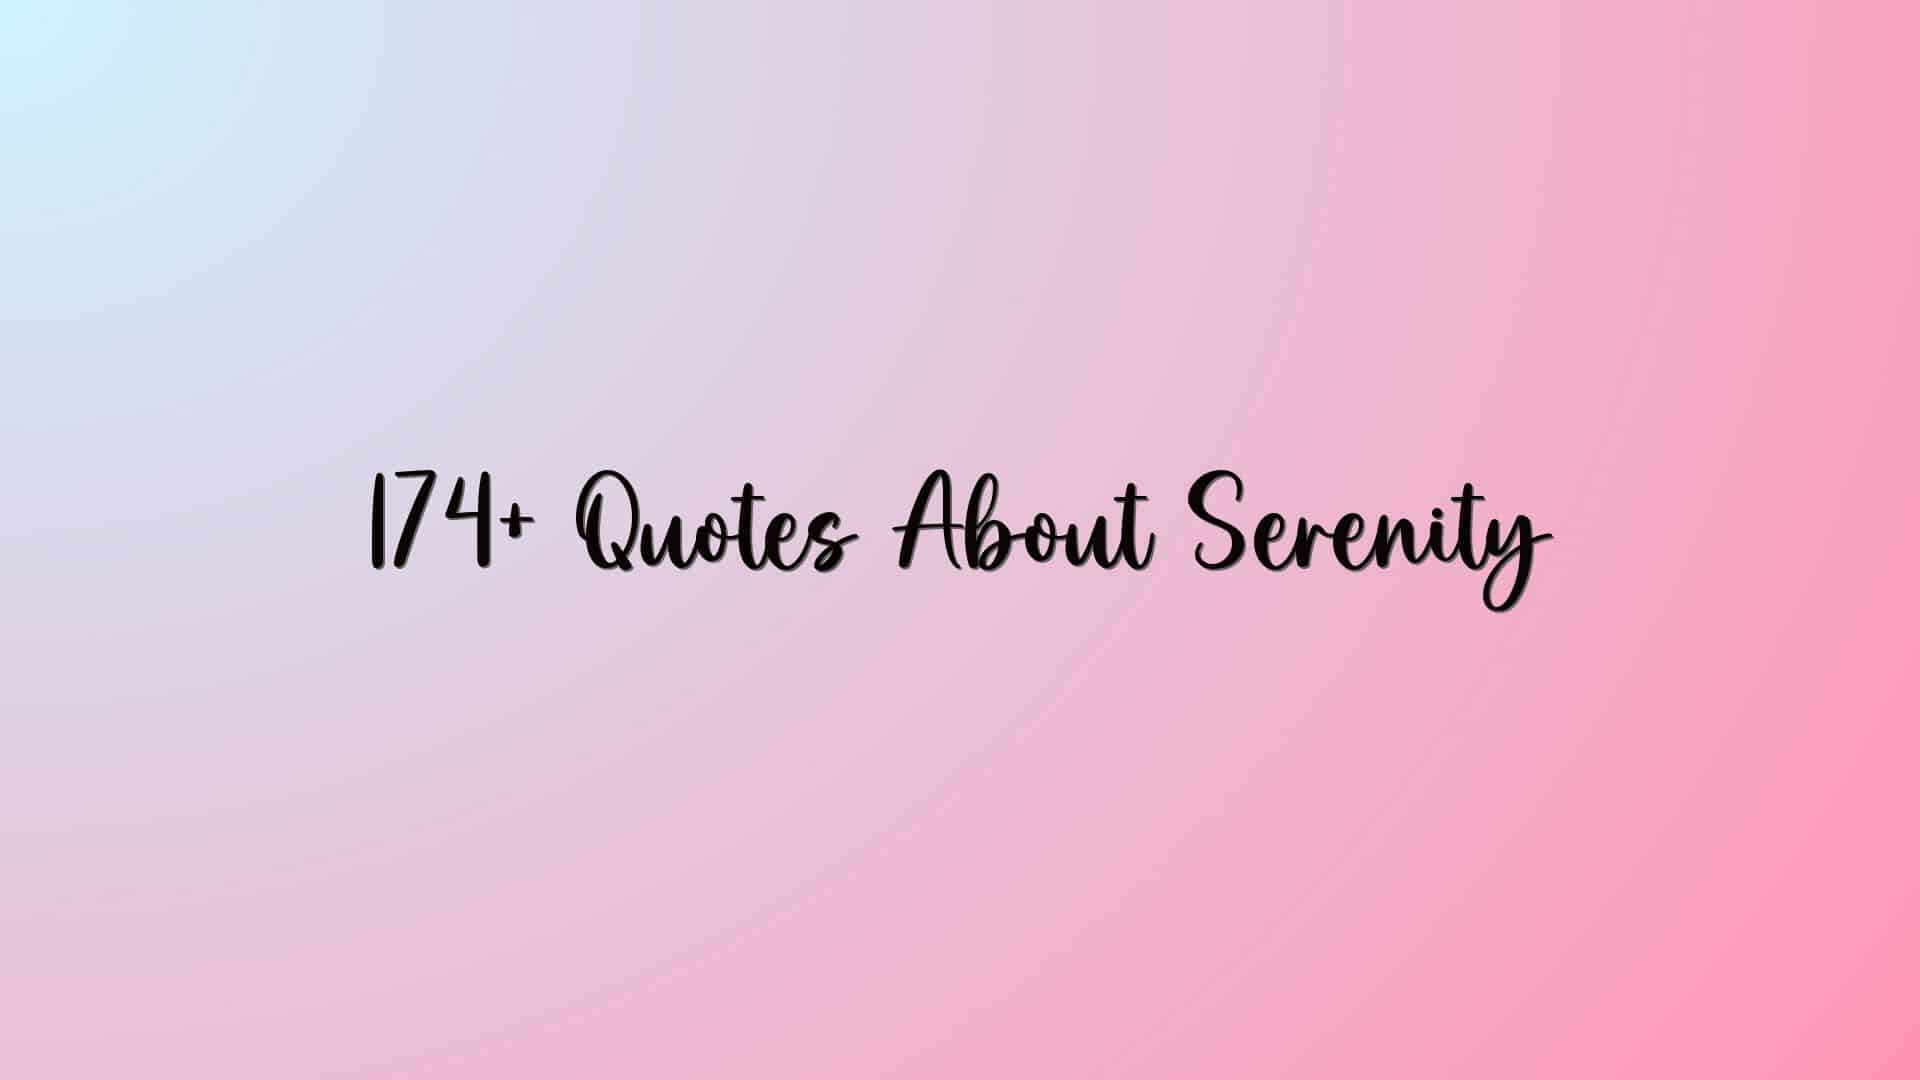 174+ Quotes About Serenity